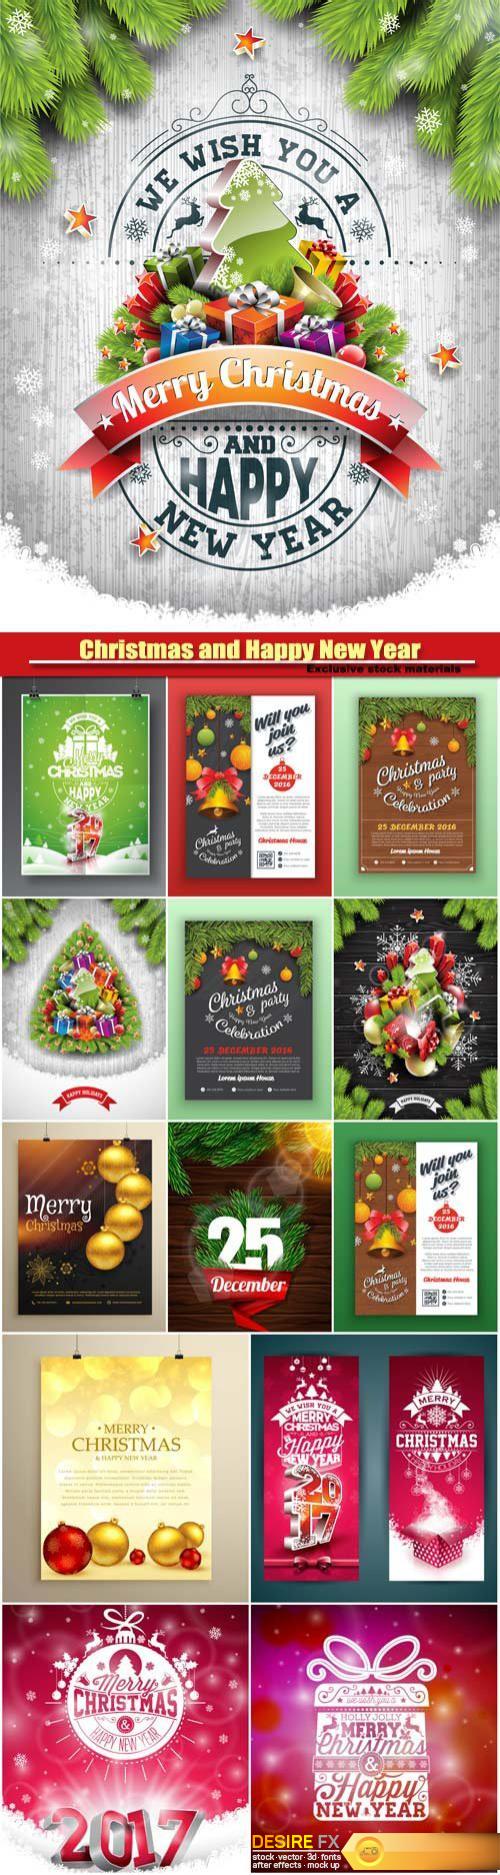 Christmas and Happy New Year party flyer template